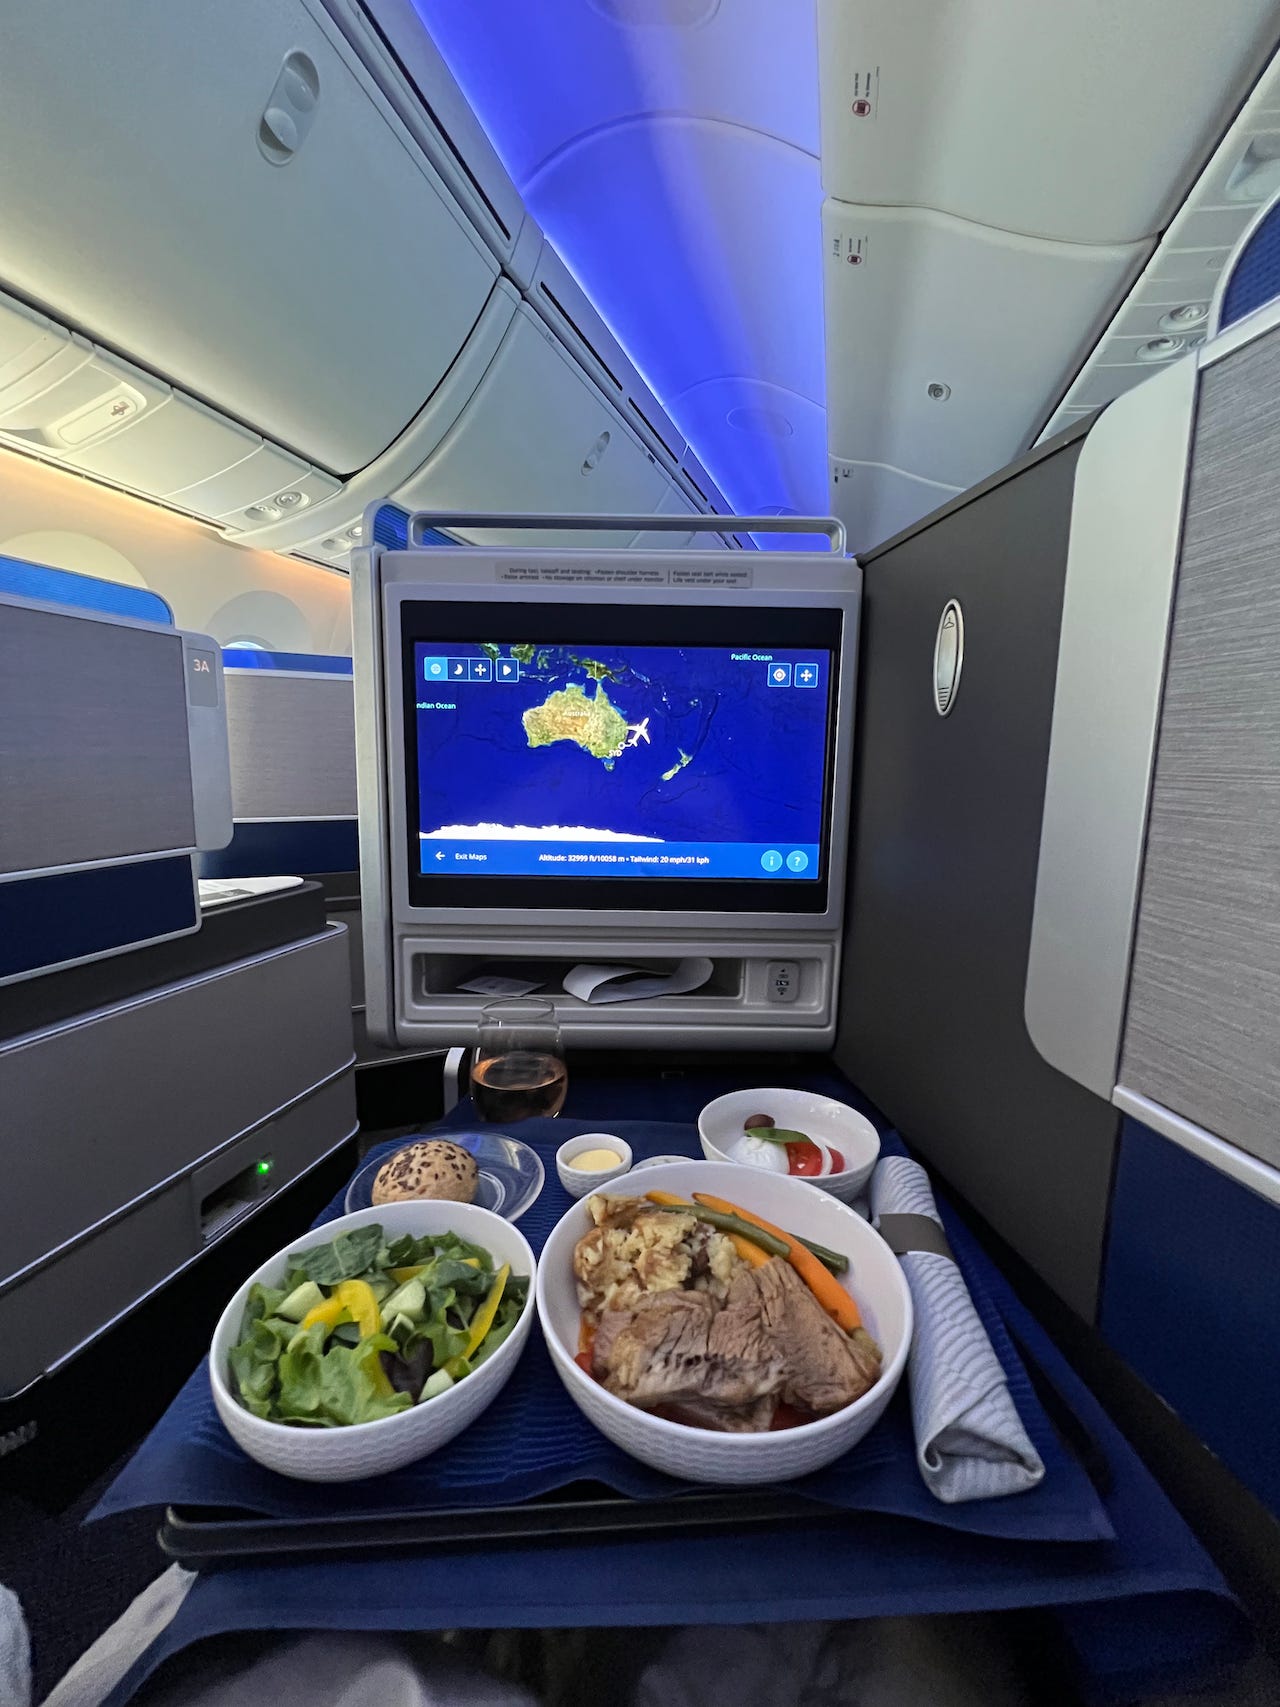 On some occasions, Crawford has received free upgrades to United Airlines Polaris business class cabin.